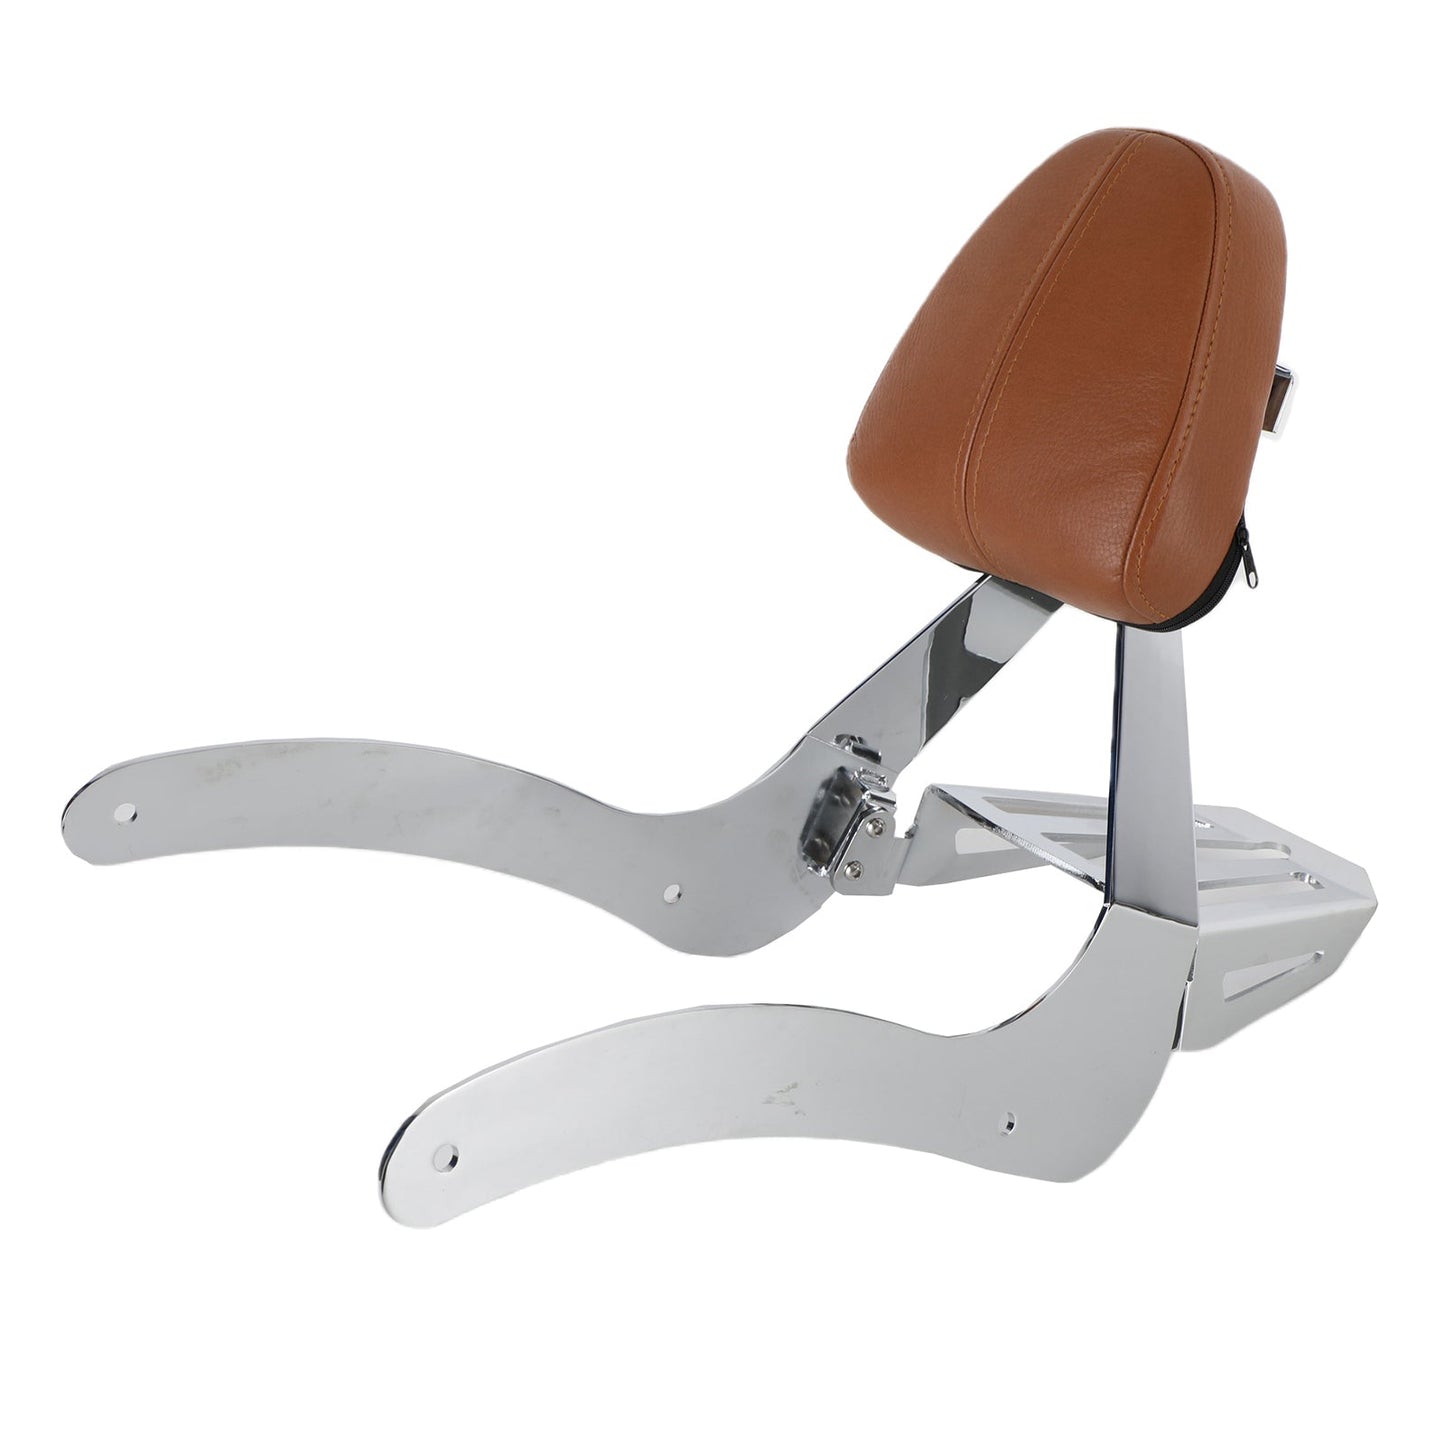 Passenger Backrest Sissy Bar fit for Indian Scout 2015-2020 Scout Sixty ABS